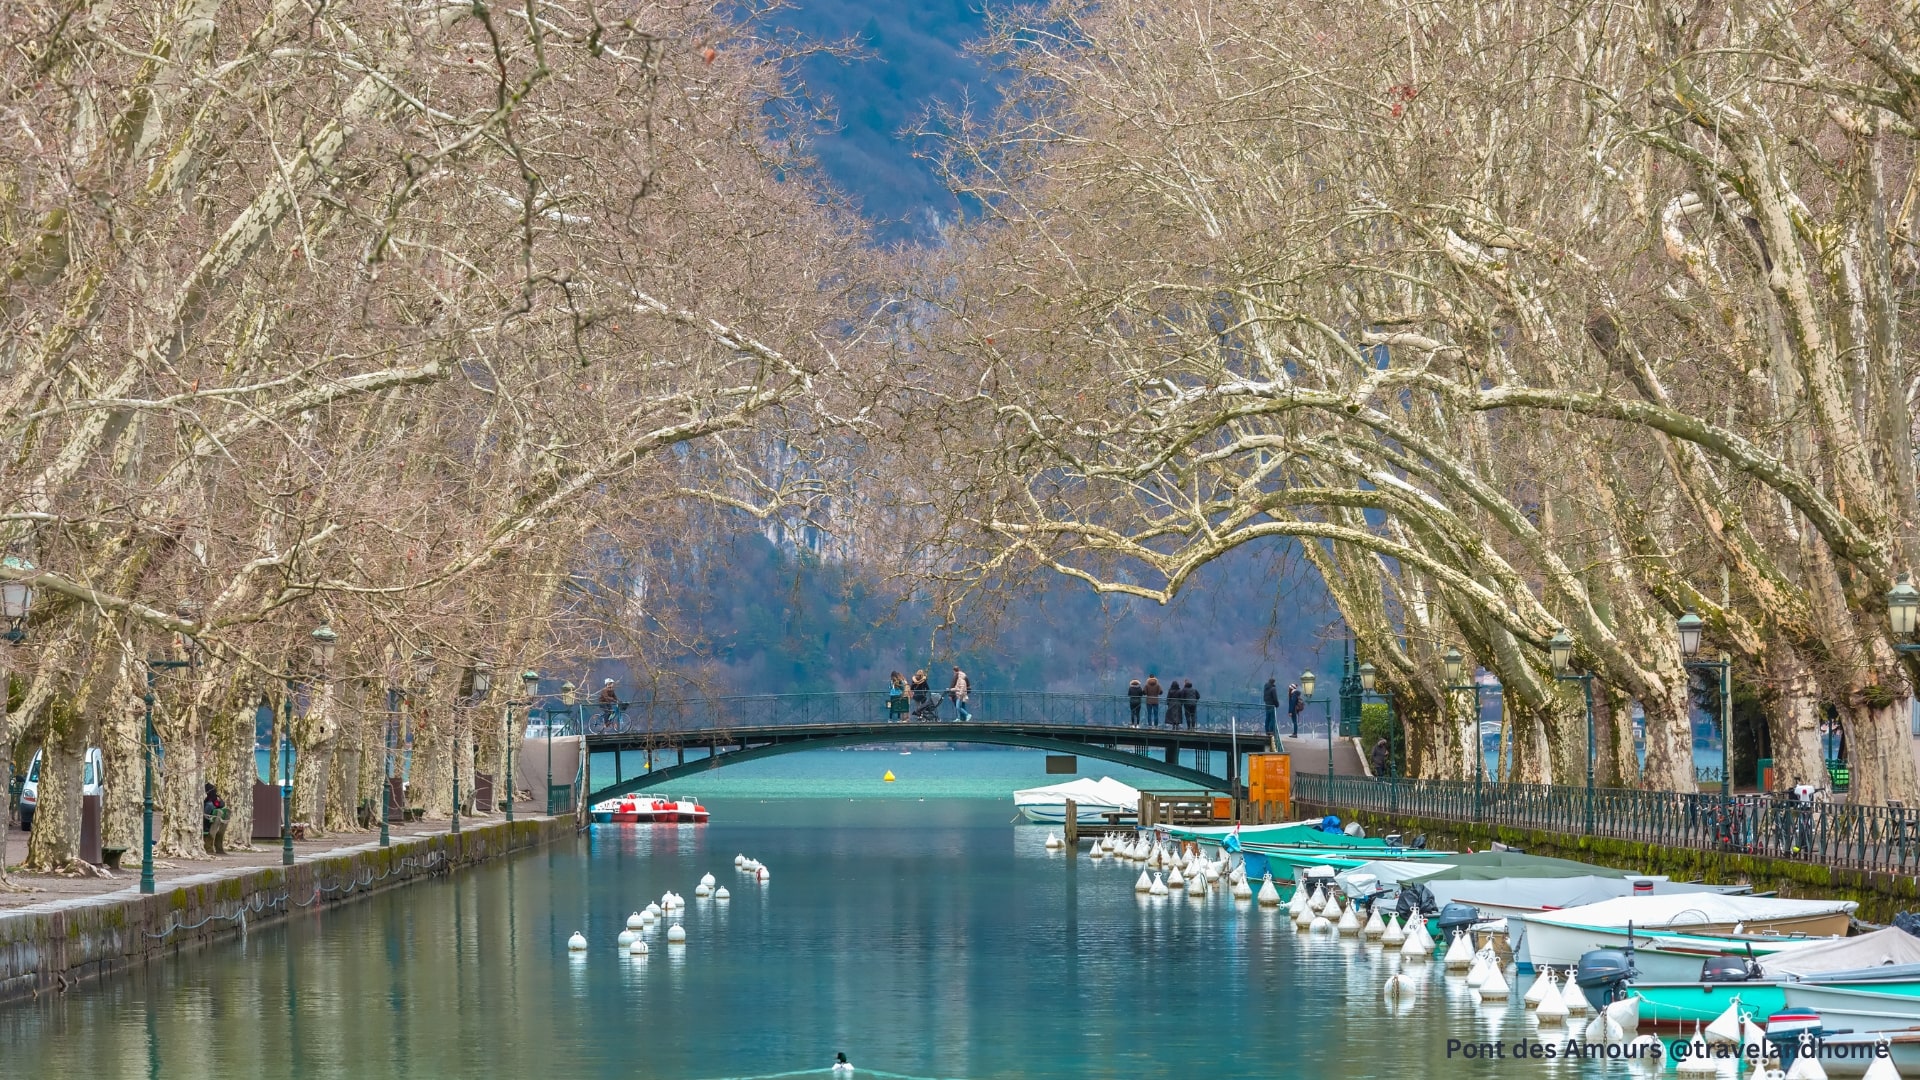 Pont des Amours, The Lovers' Bridge, a romantic spot for couples to share a kiss min